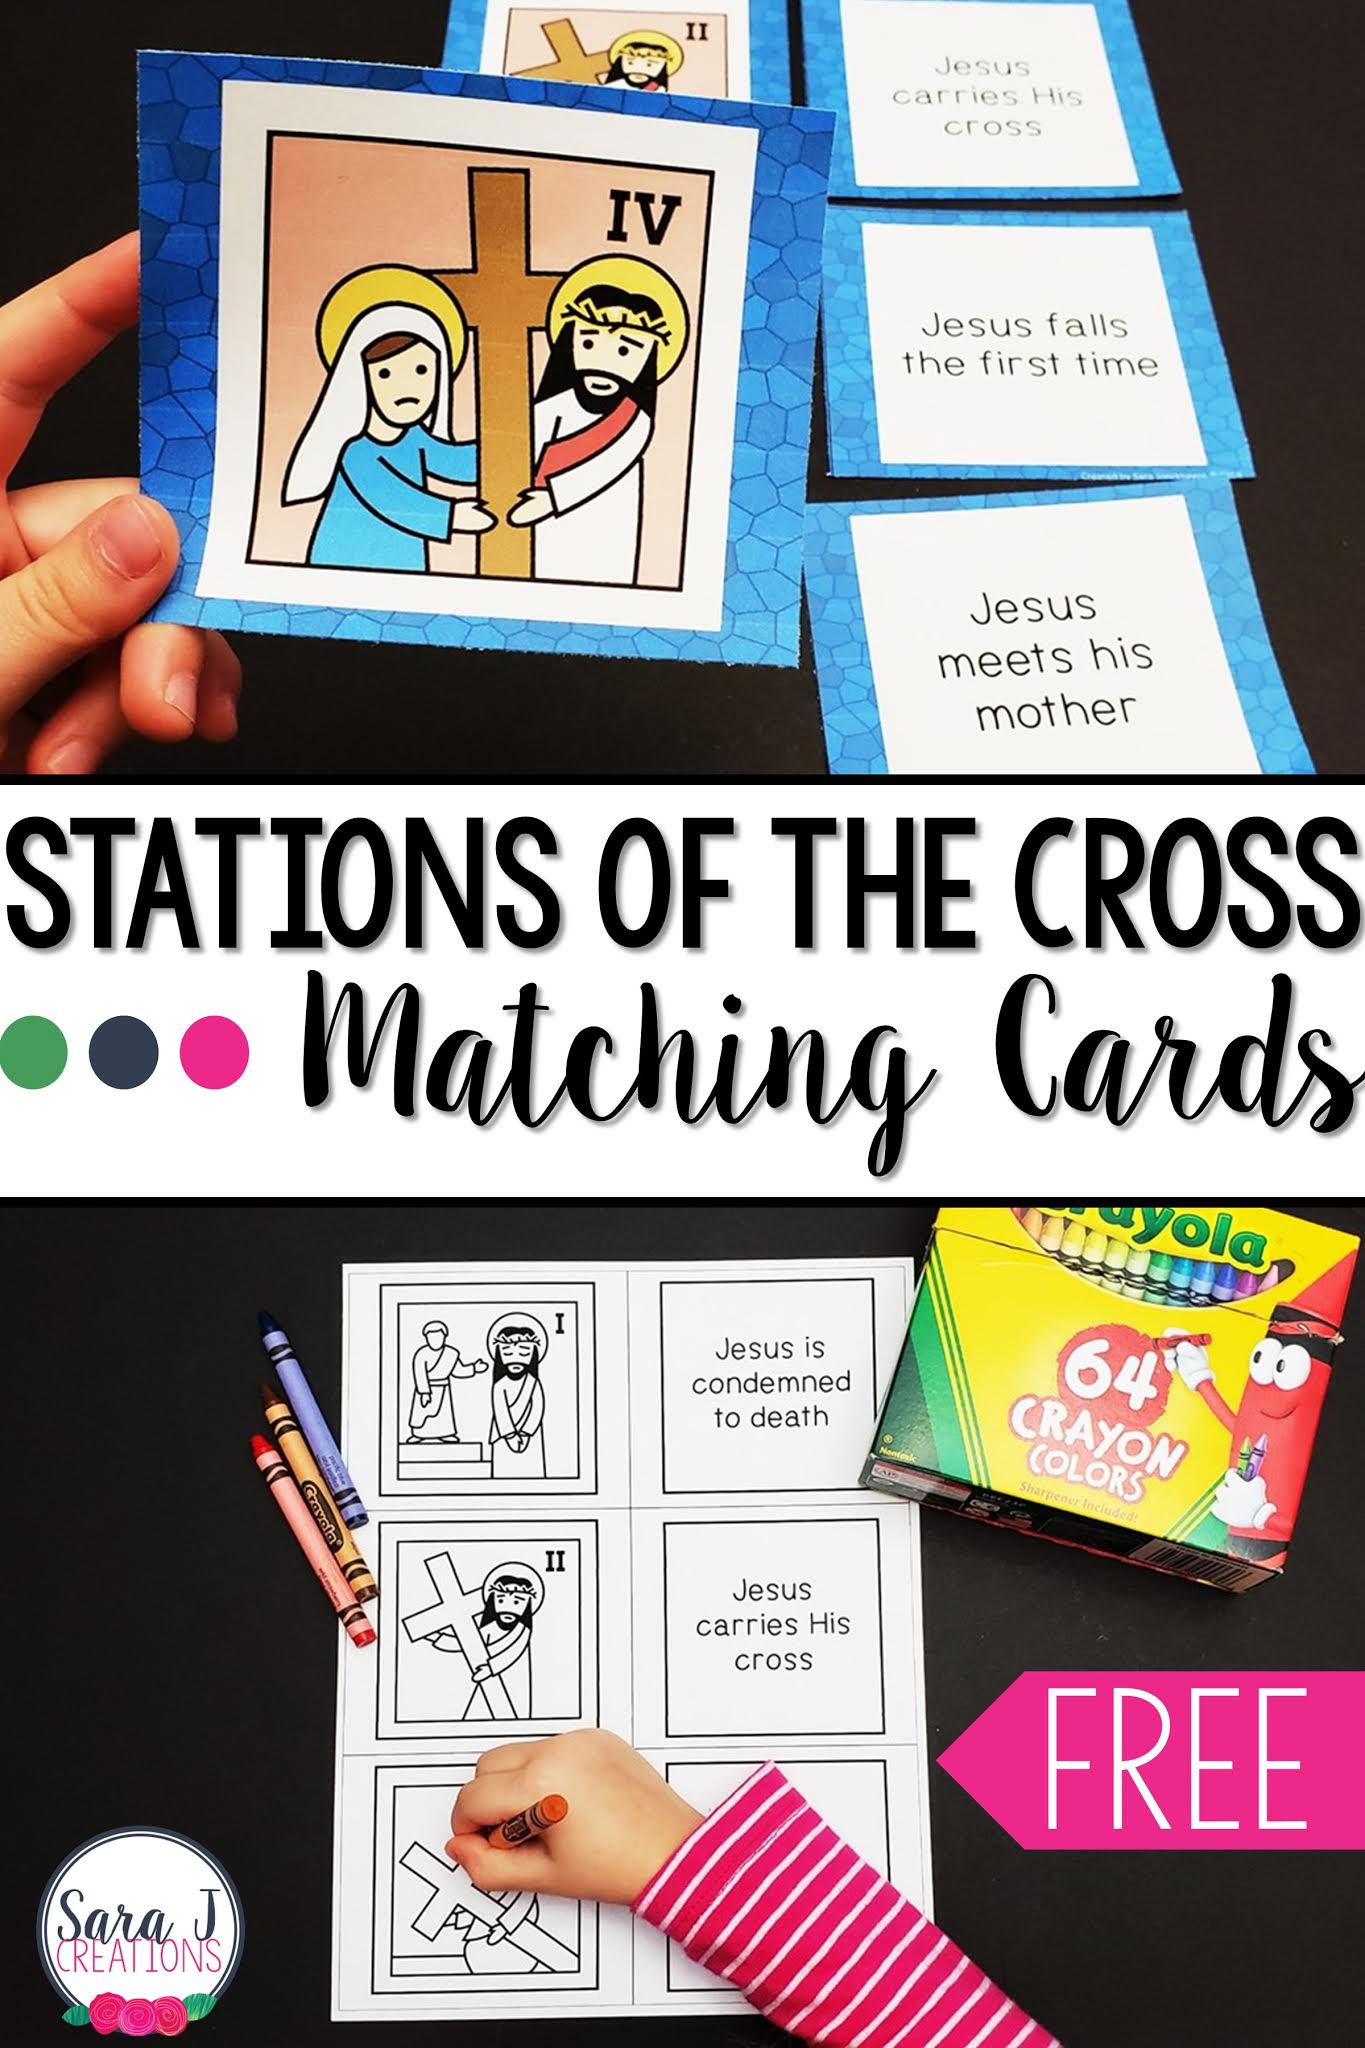 Stations of the Cross Matching Cards Freebie Sara J Creations